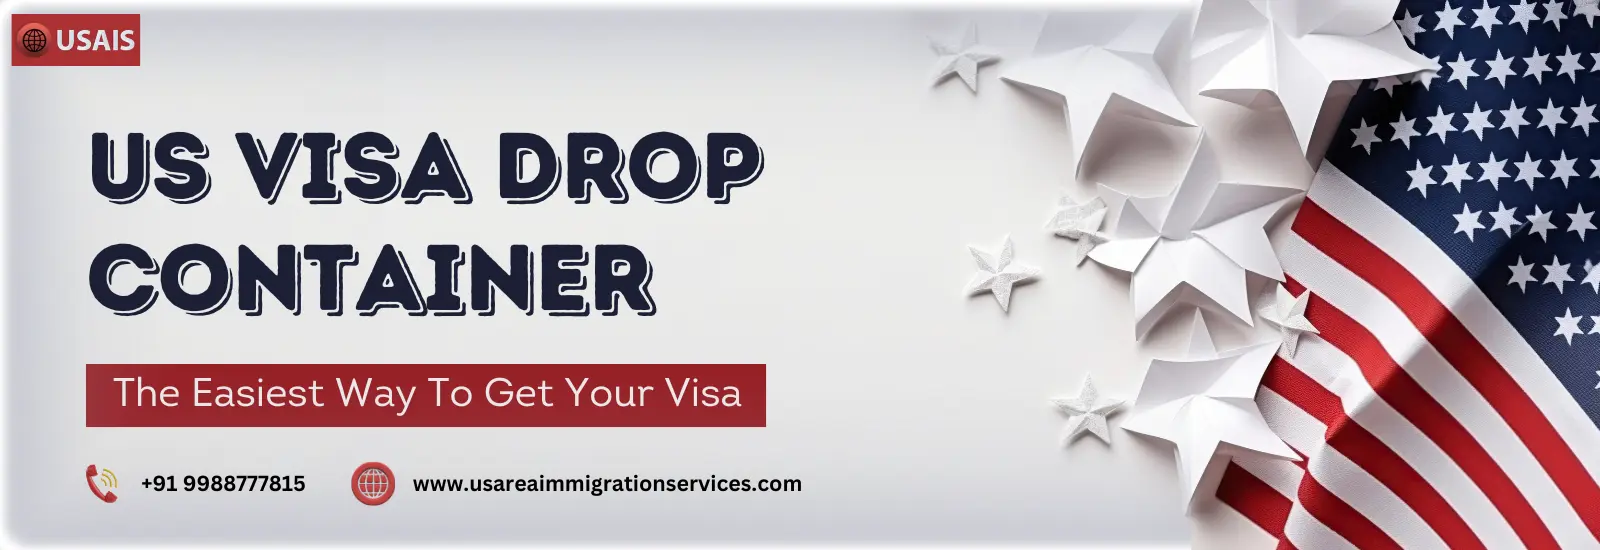 US-Visa-Drop-Container-The-Easiest-Way-To-Get-Your-Visa